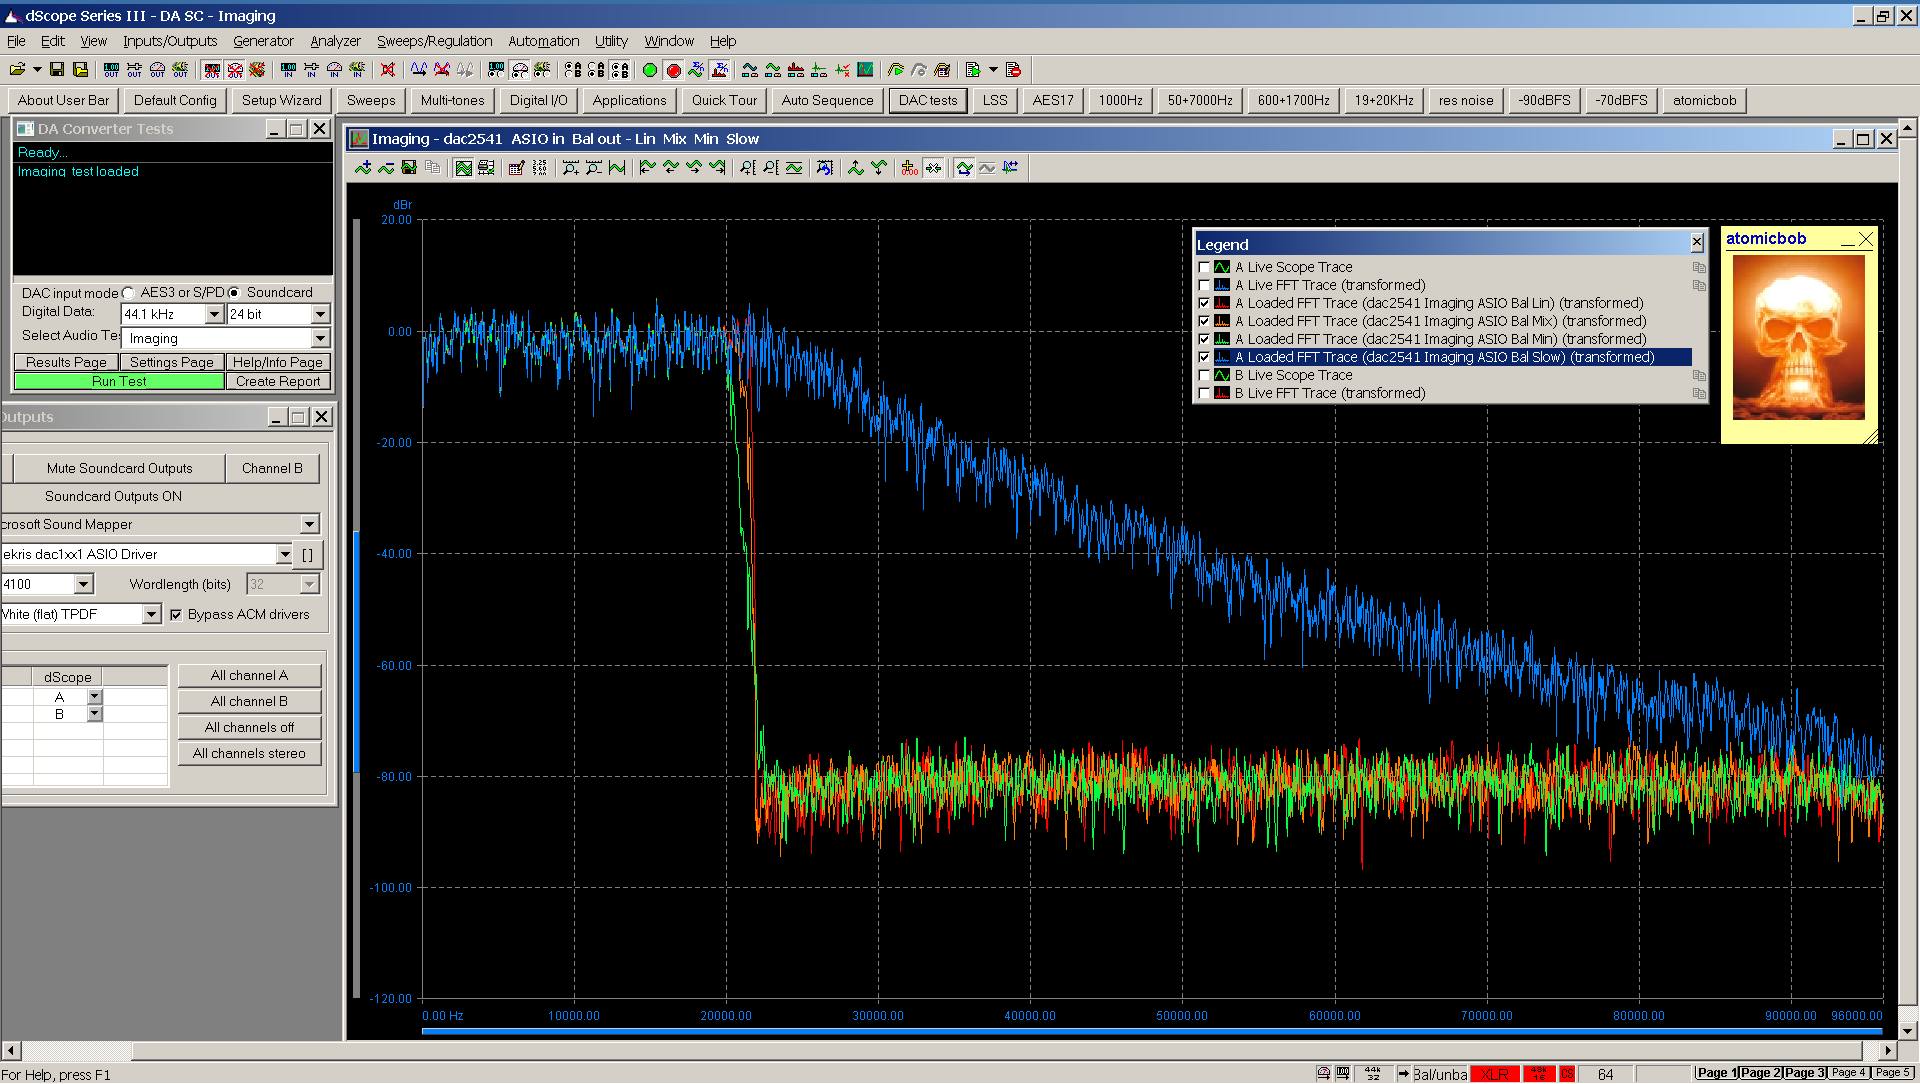 12 20210125 dac2541 imaging FFT ASIO Bal - 4 filters.png